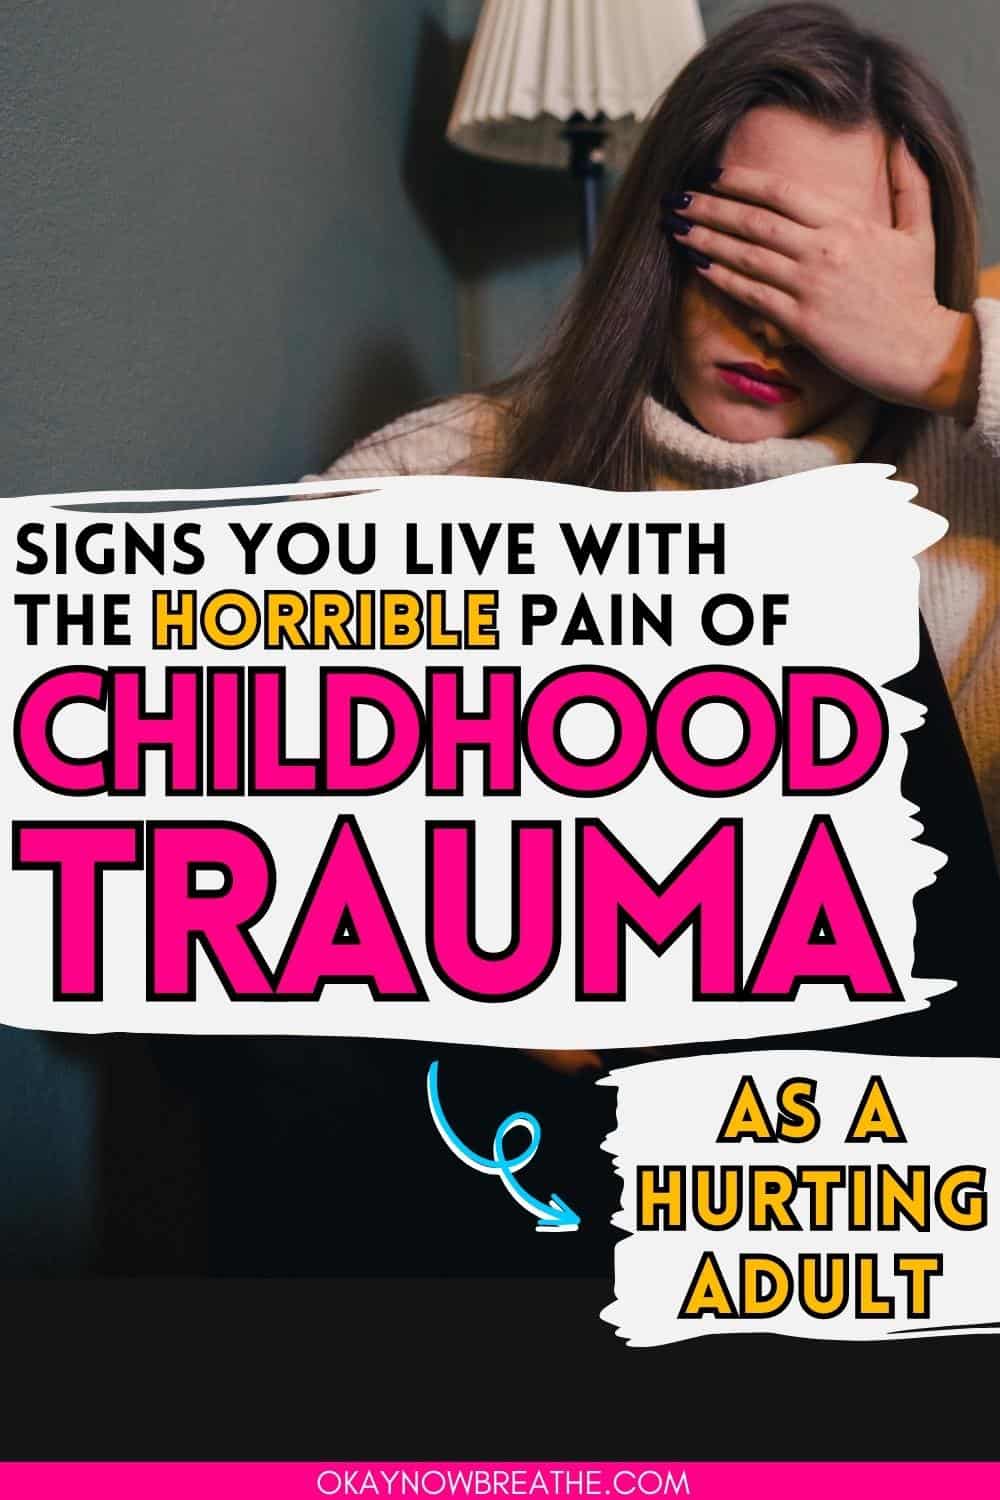 There is a woman with her hand shielding her eyes. There's a text overlay that says: signs you live with the horrible pain of childhood trauma as a hurting adult